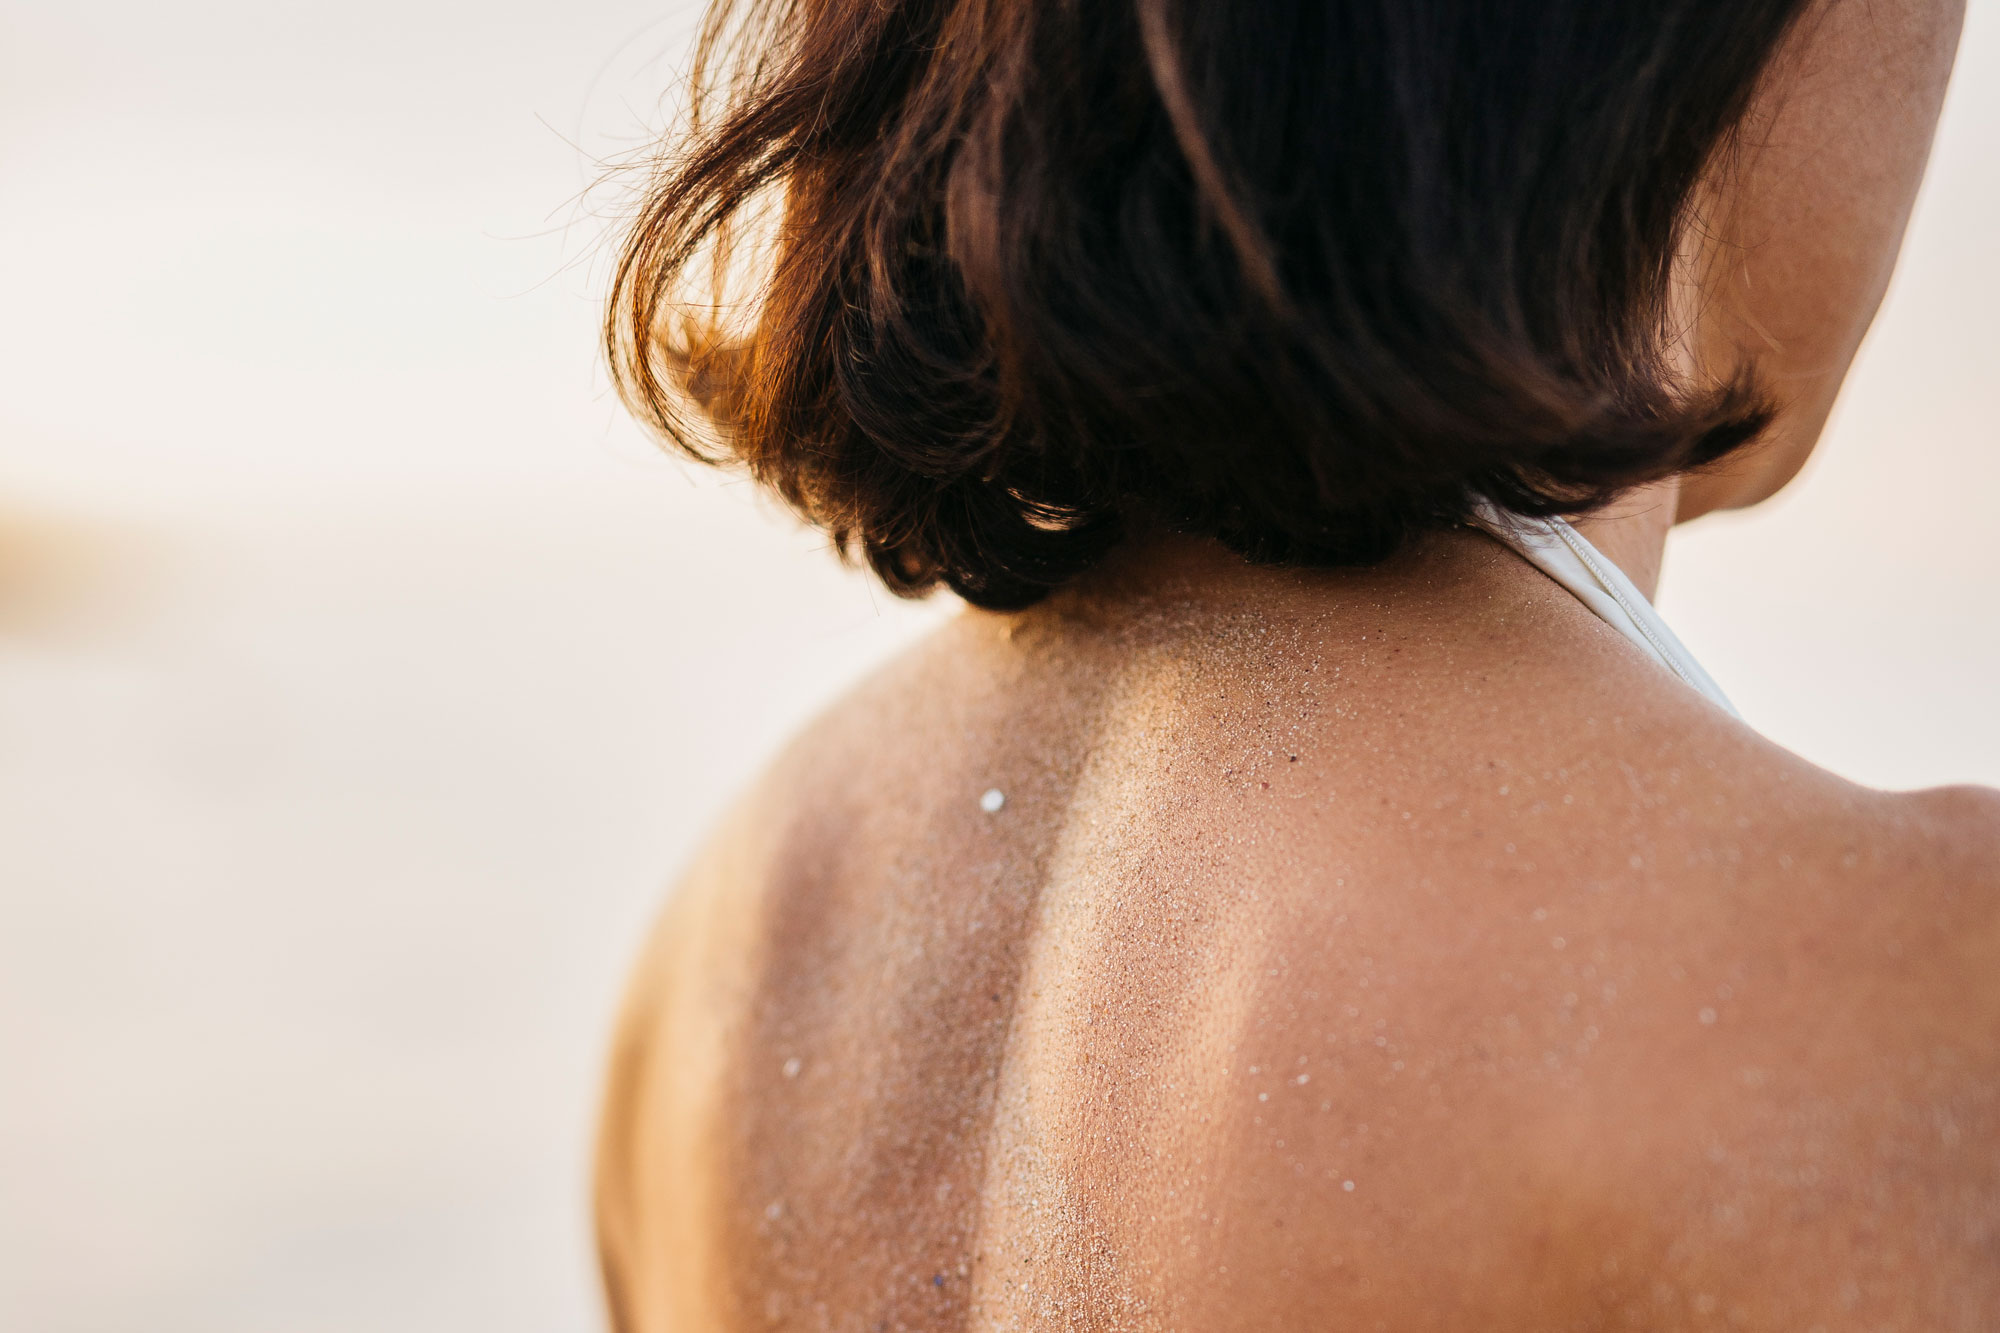 close up of woman's back at the beach